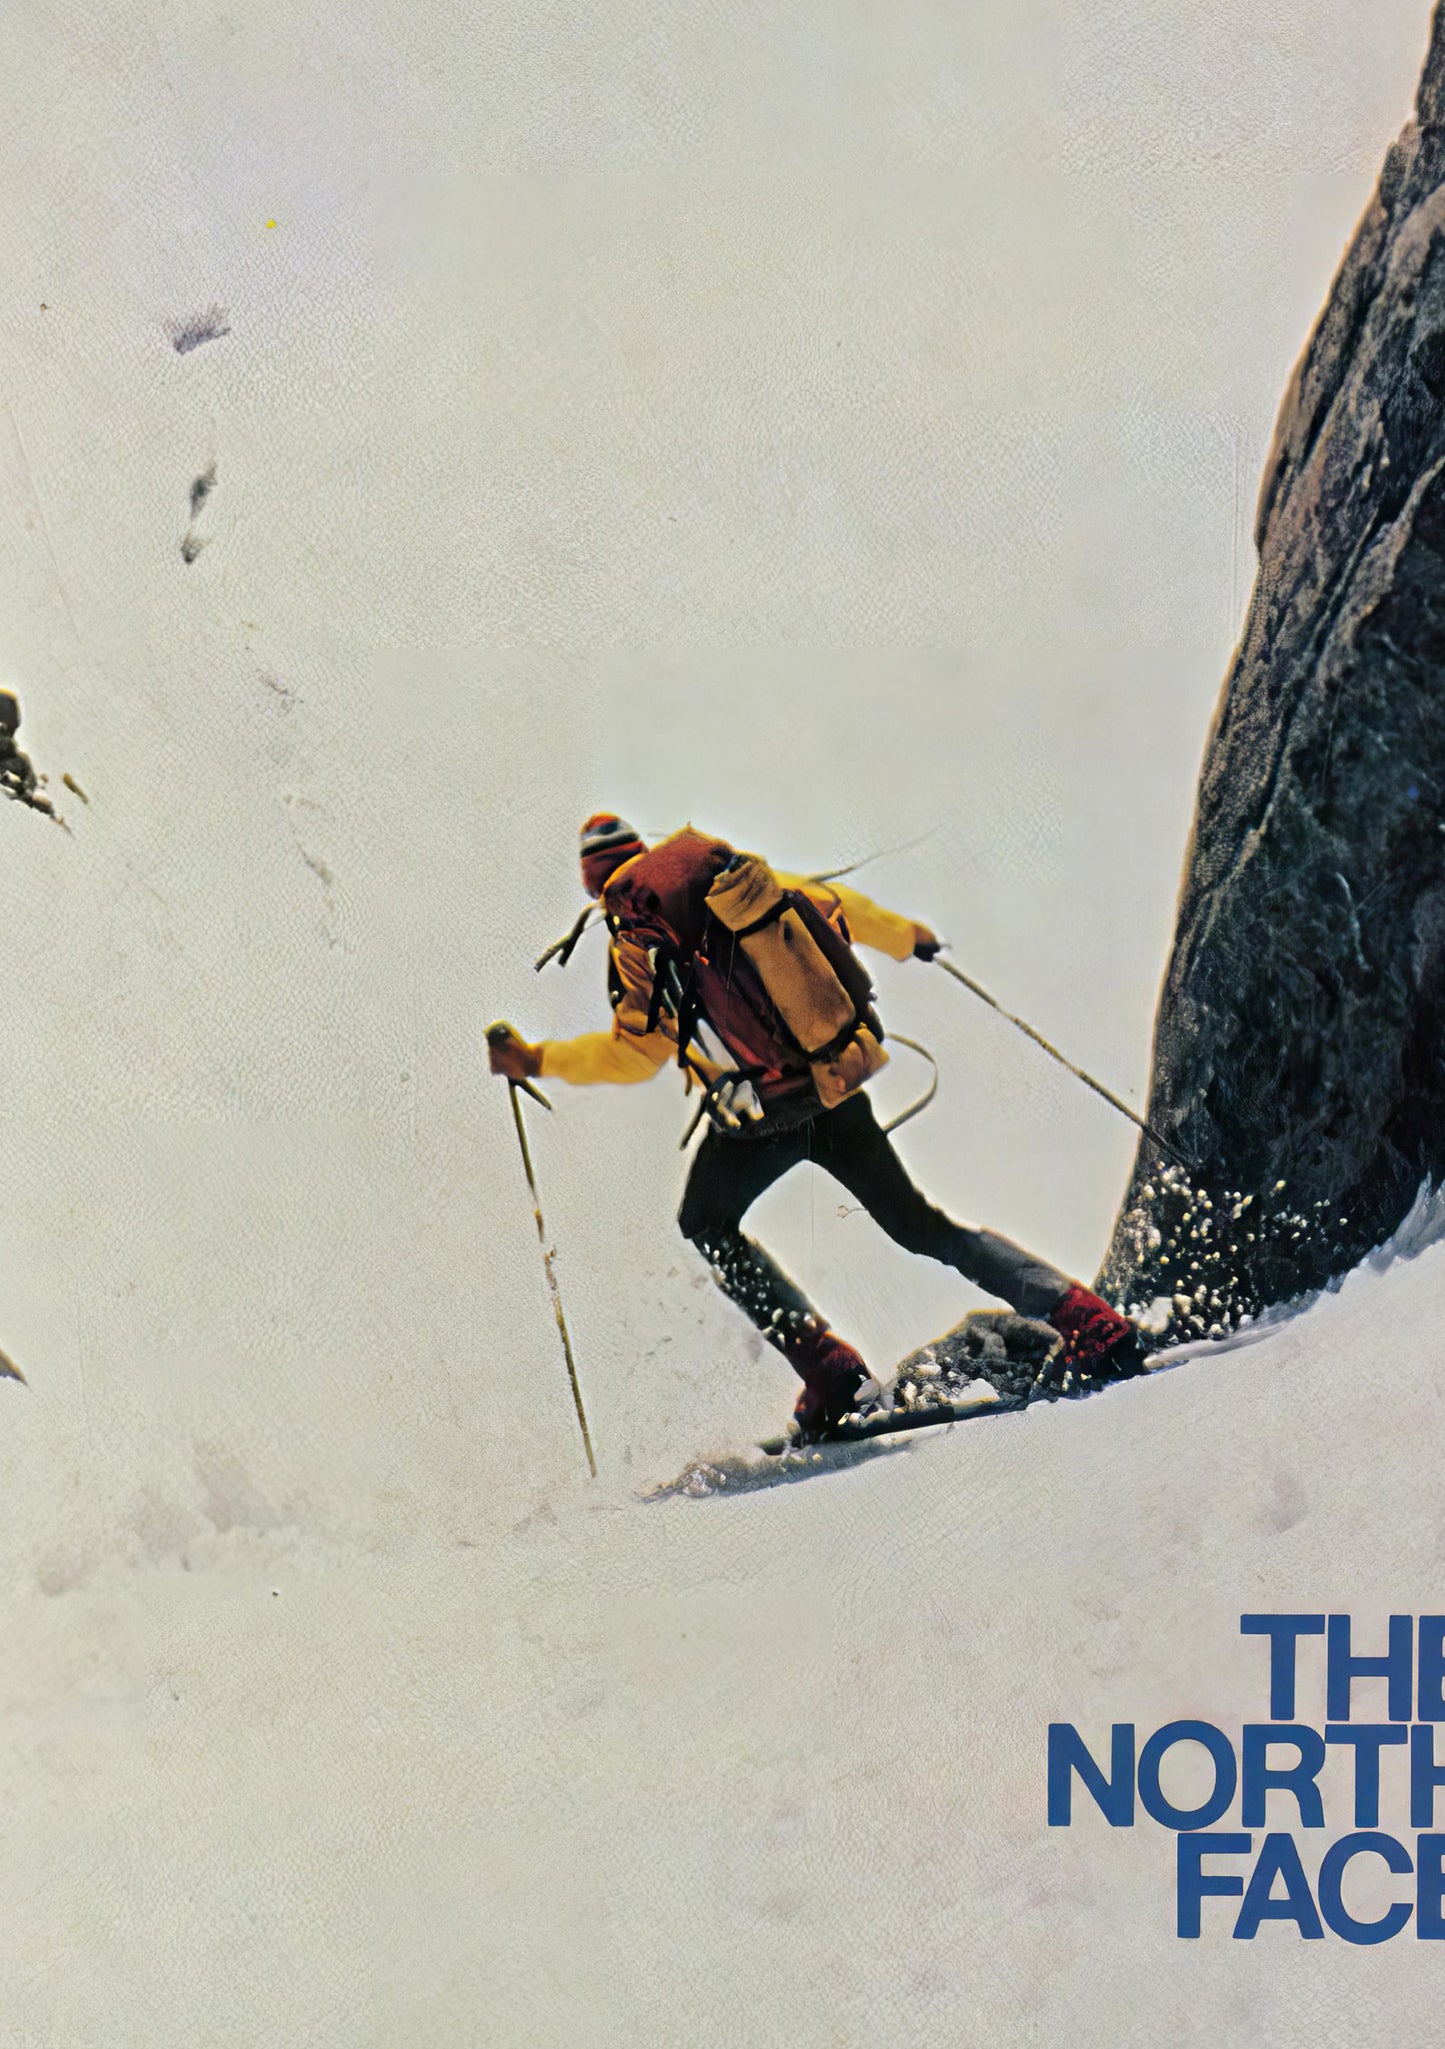 The North Face 1984-1985 Fall/Winter Magazine Front Cover Poster